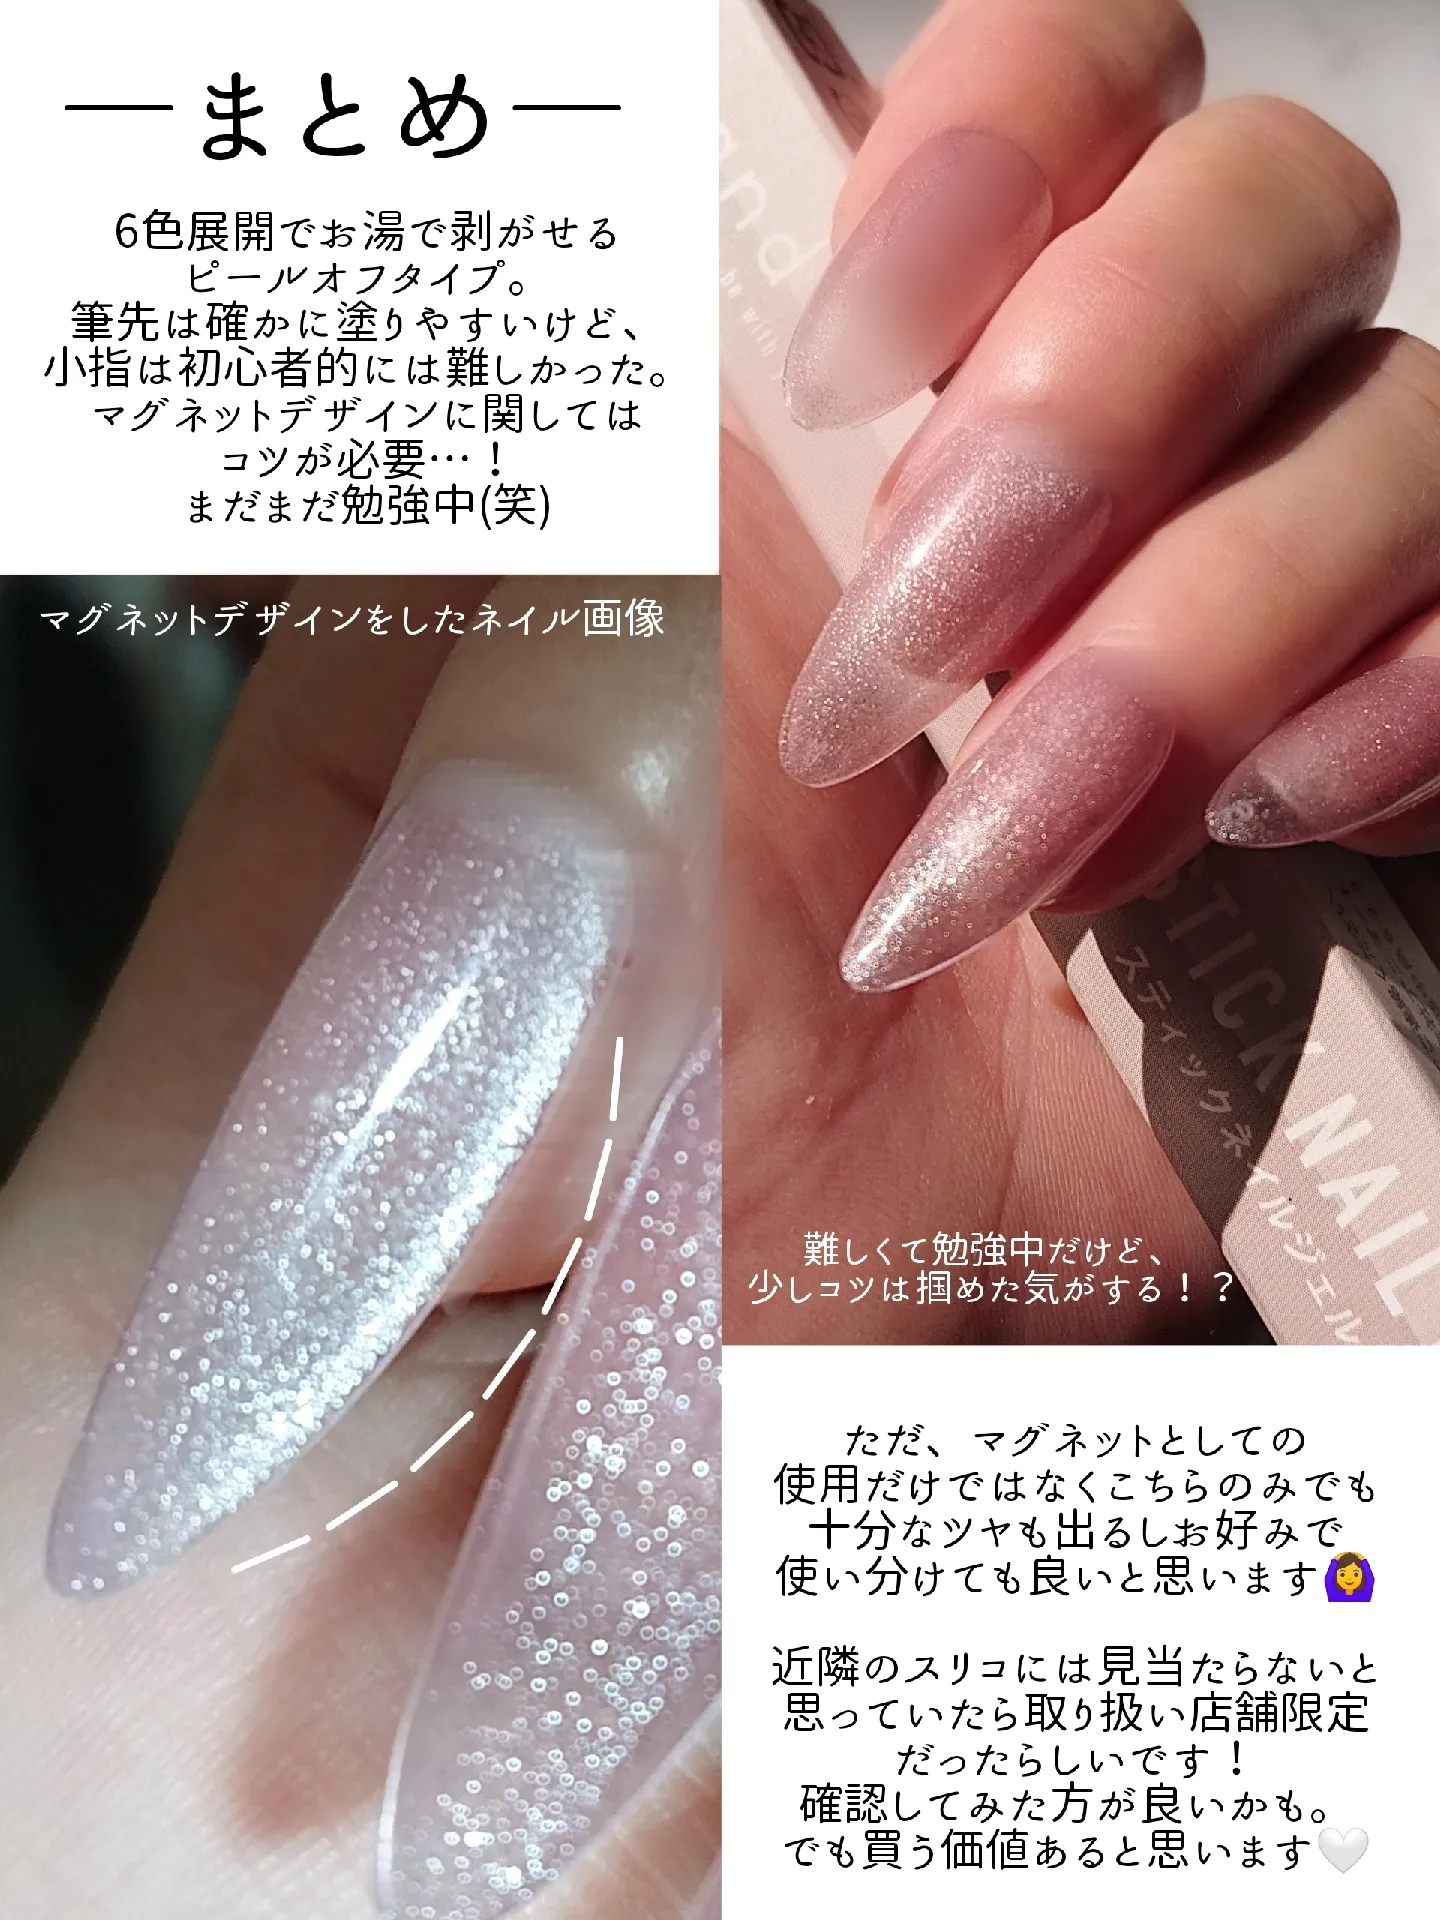 New nail of petit plastic world] Surico magnet nail💅 | Gallery